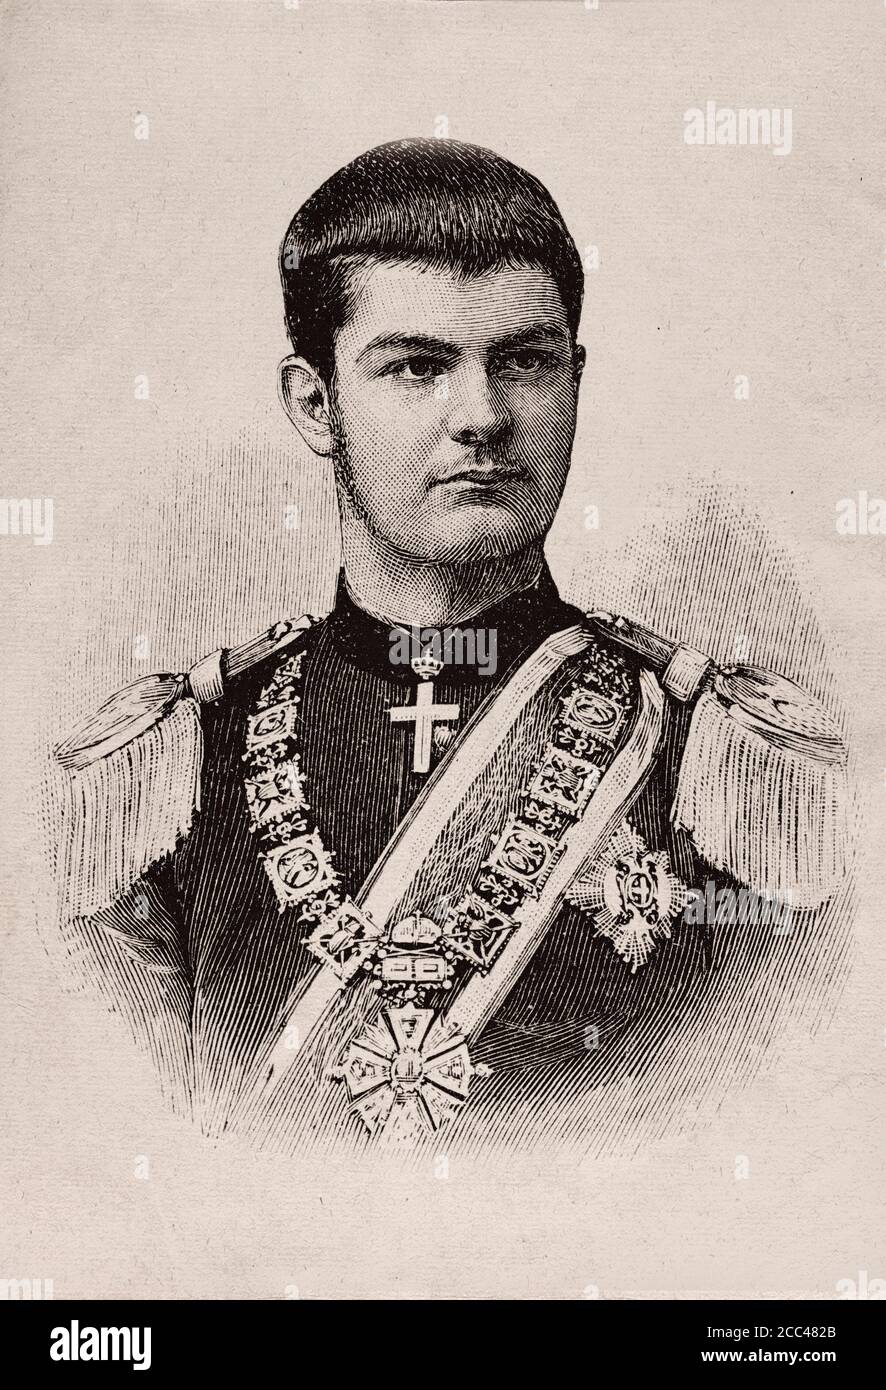 Alexander I or Aleksandar Obrenovic (1876 – 1903) was king of Serbia from 1889 to 1903 when he and his wife, Draga Masin, were assassinated by a group Stock Photo